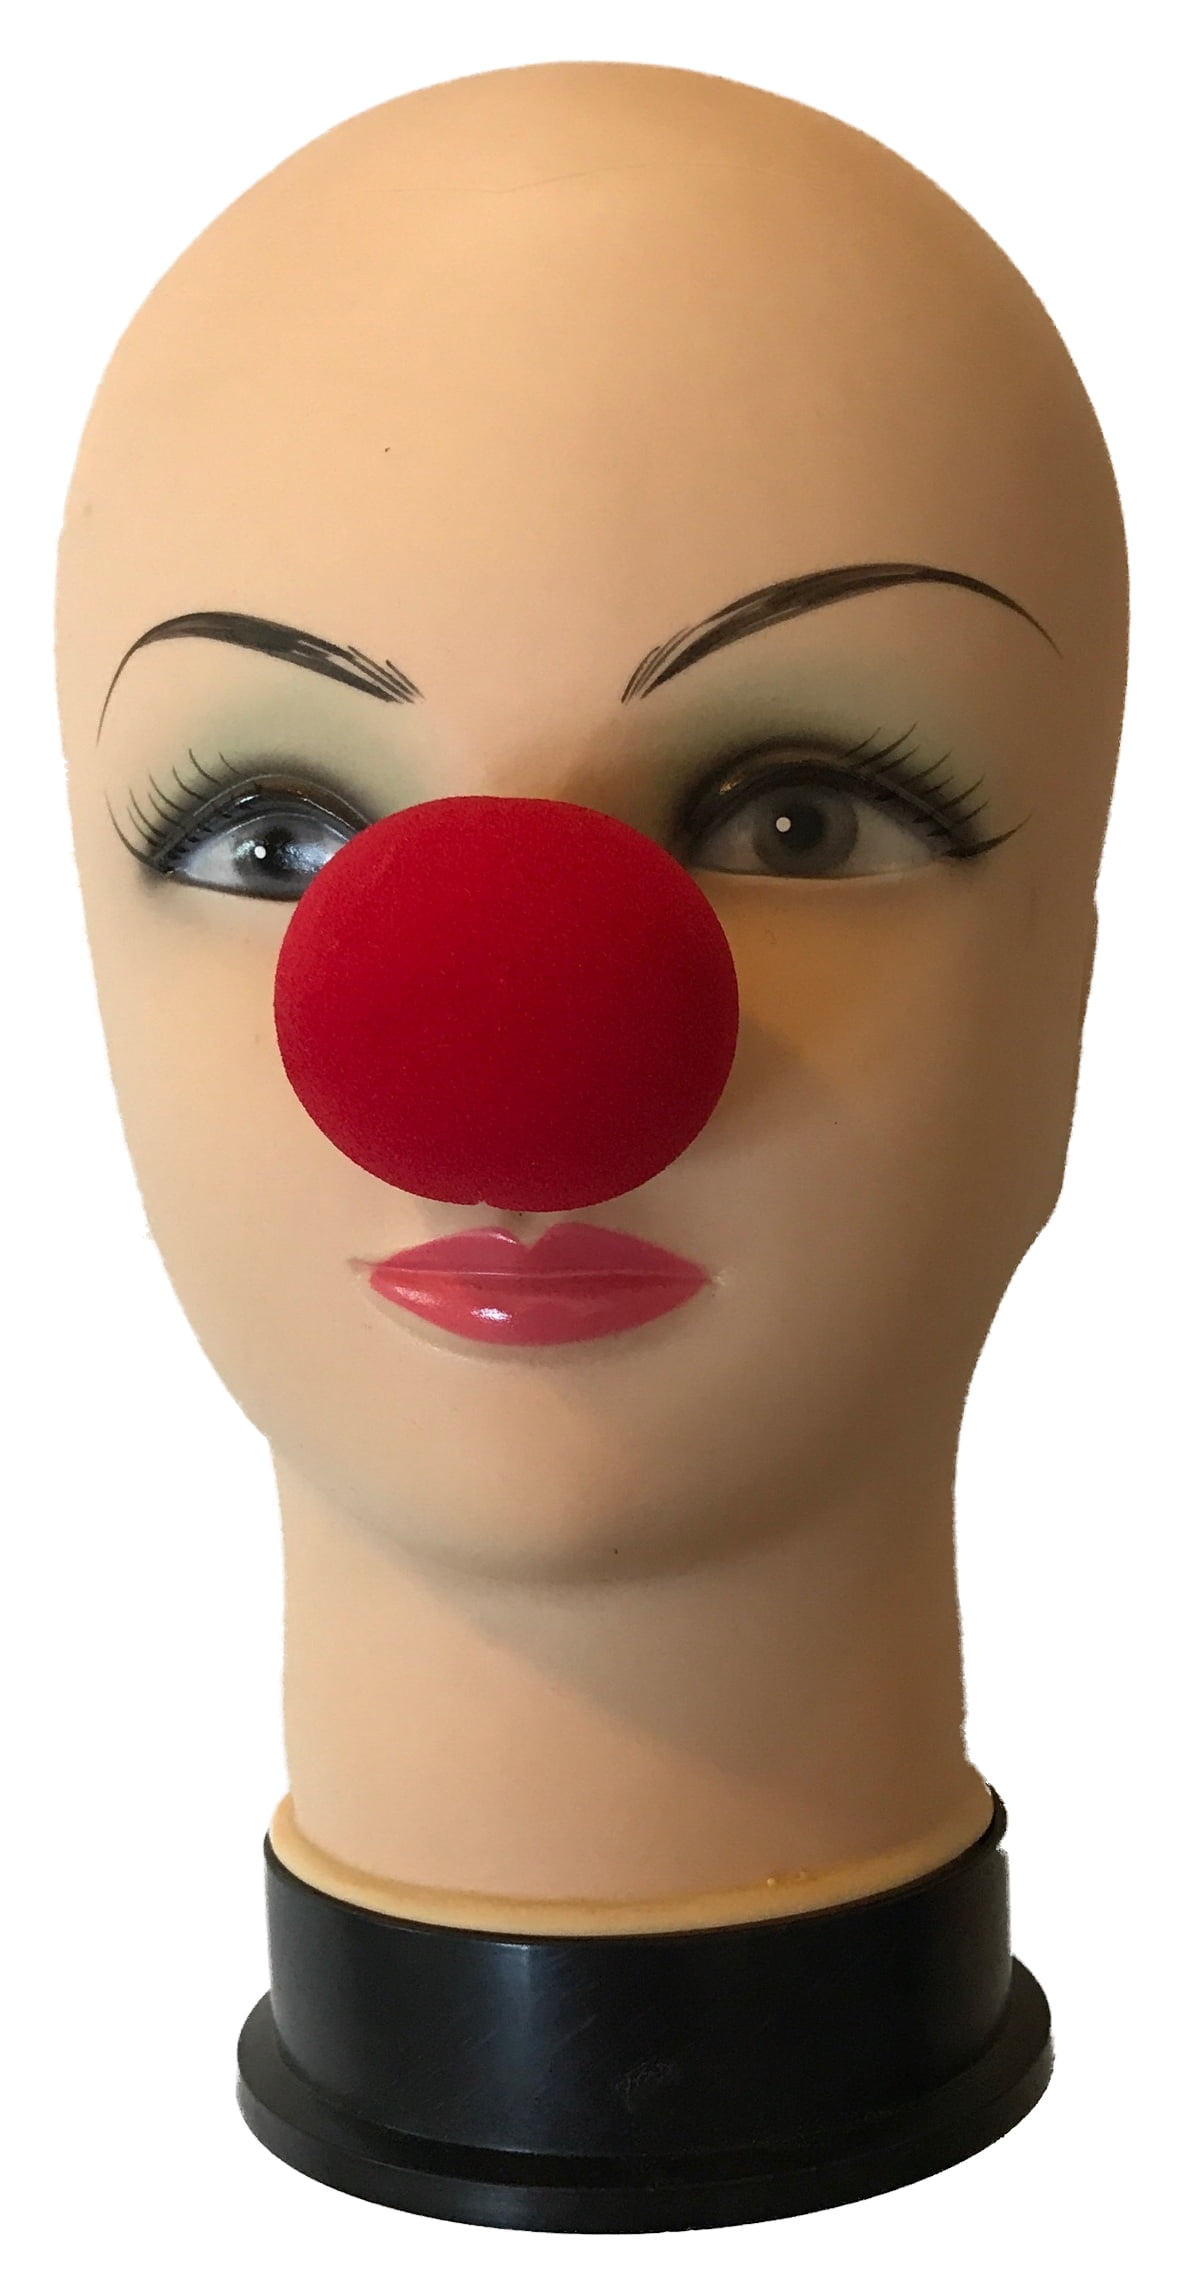 The Finishing Touch For Any Costume 1.5" Foam Clown Nose Green, 2 Noses 